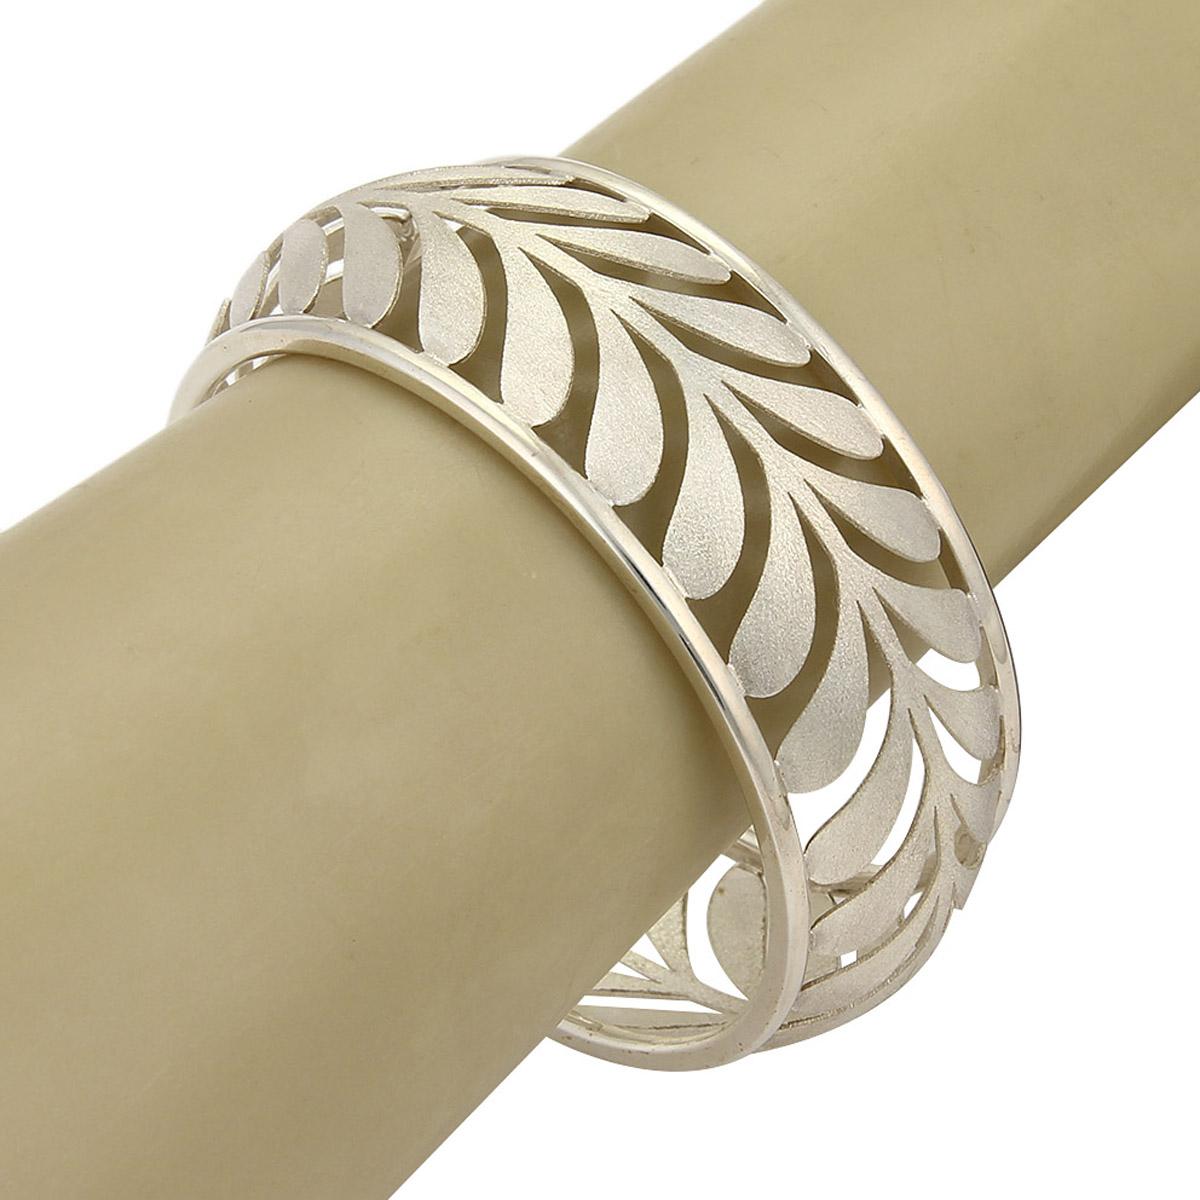 This is a gorgeous authentic wide bangle from Tiffany & Co. by designer Paloma Picasso from her Paloma Villa Palm Collection. It is crafted from sterling silver in a polished and textured finish. The bangle features a wide dome shape with fine grain